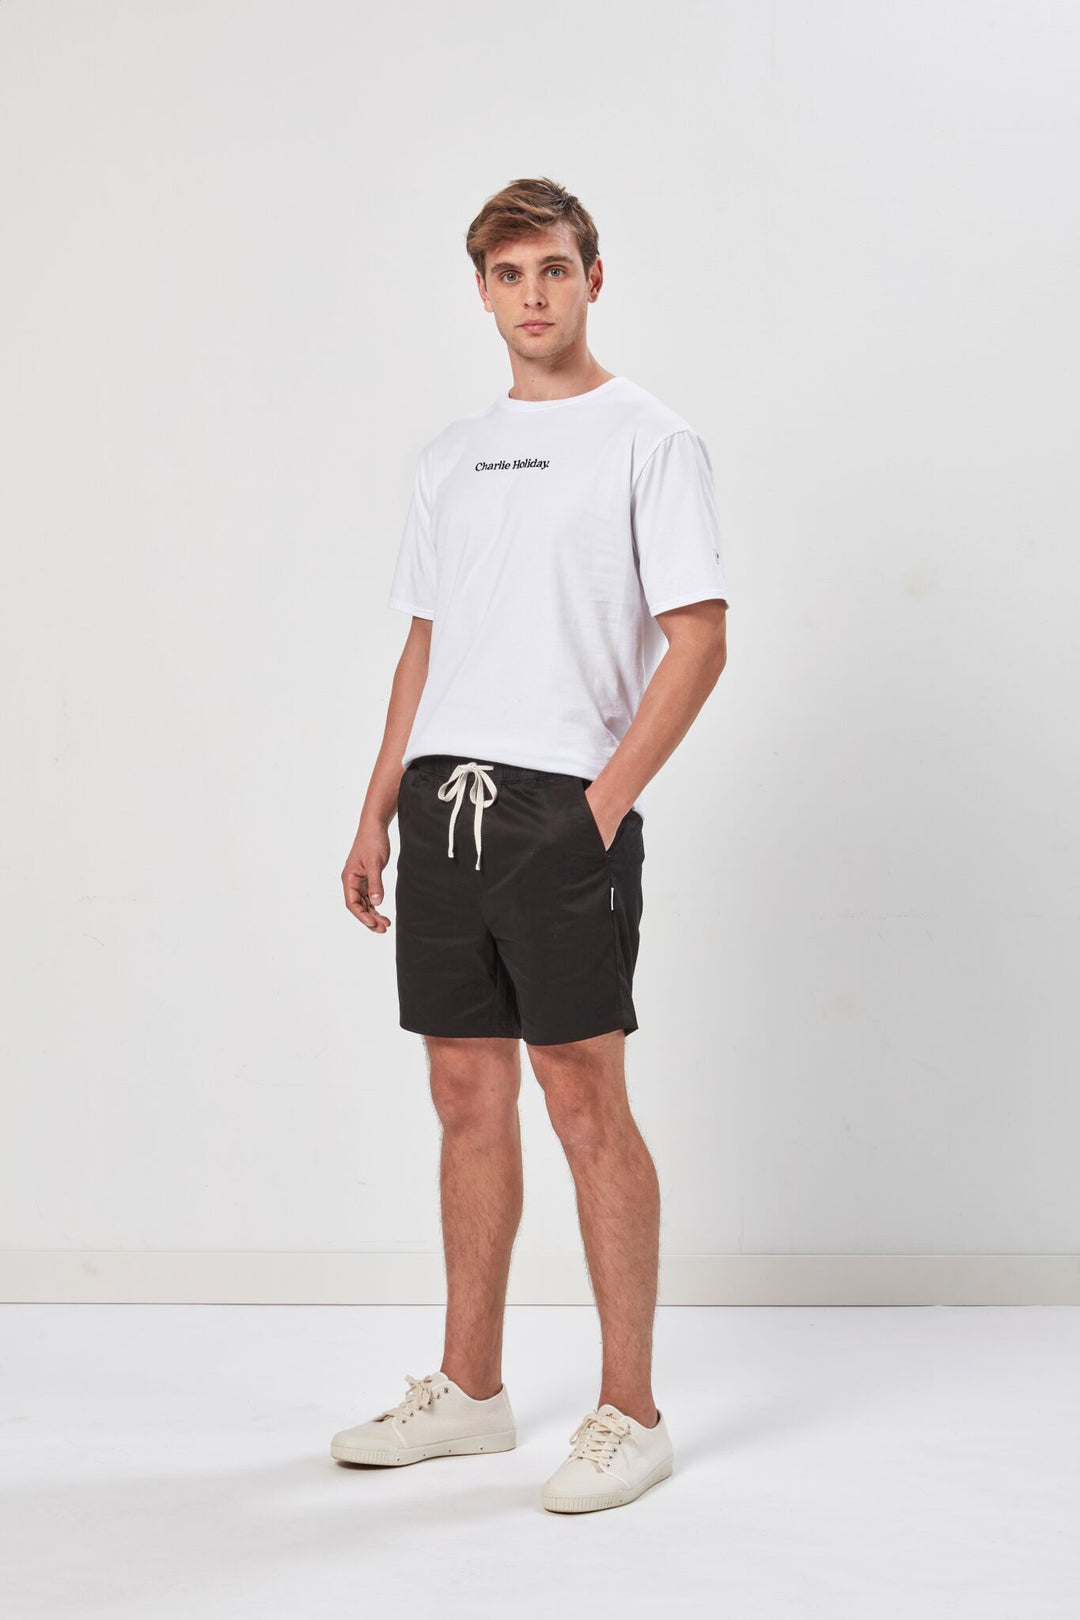 Diaz Chino Short | Black - West of Camden - Main Image Number 1 of 3